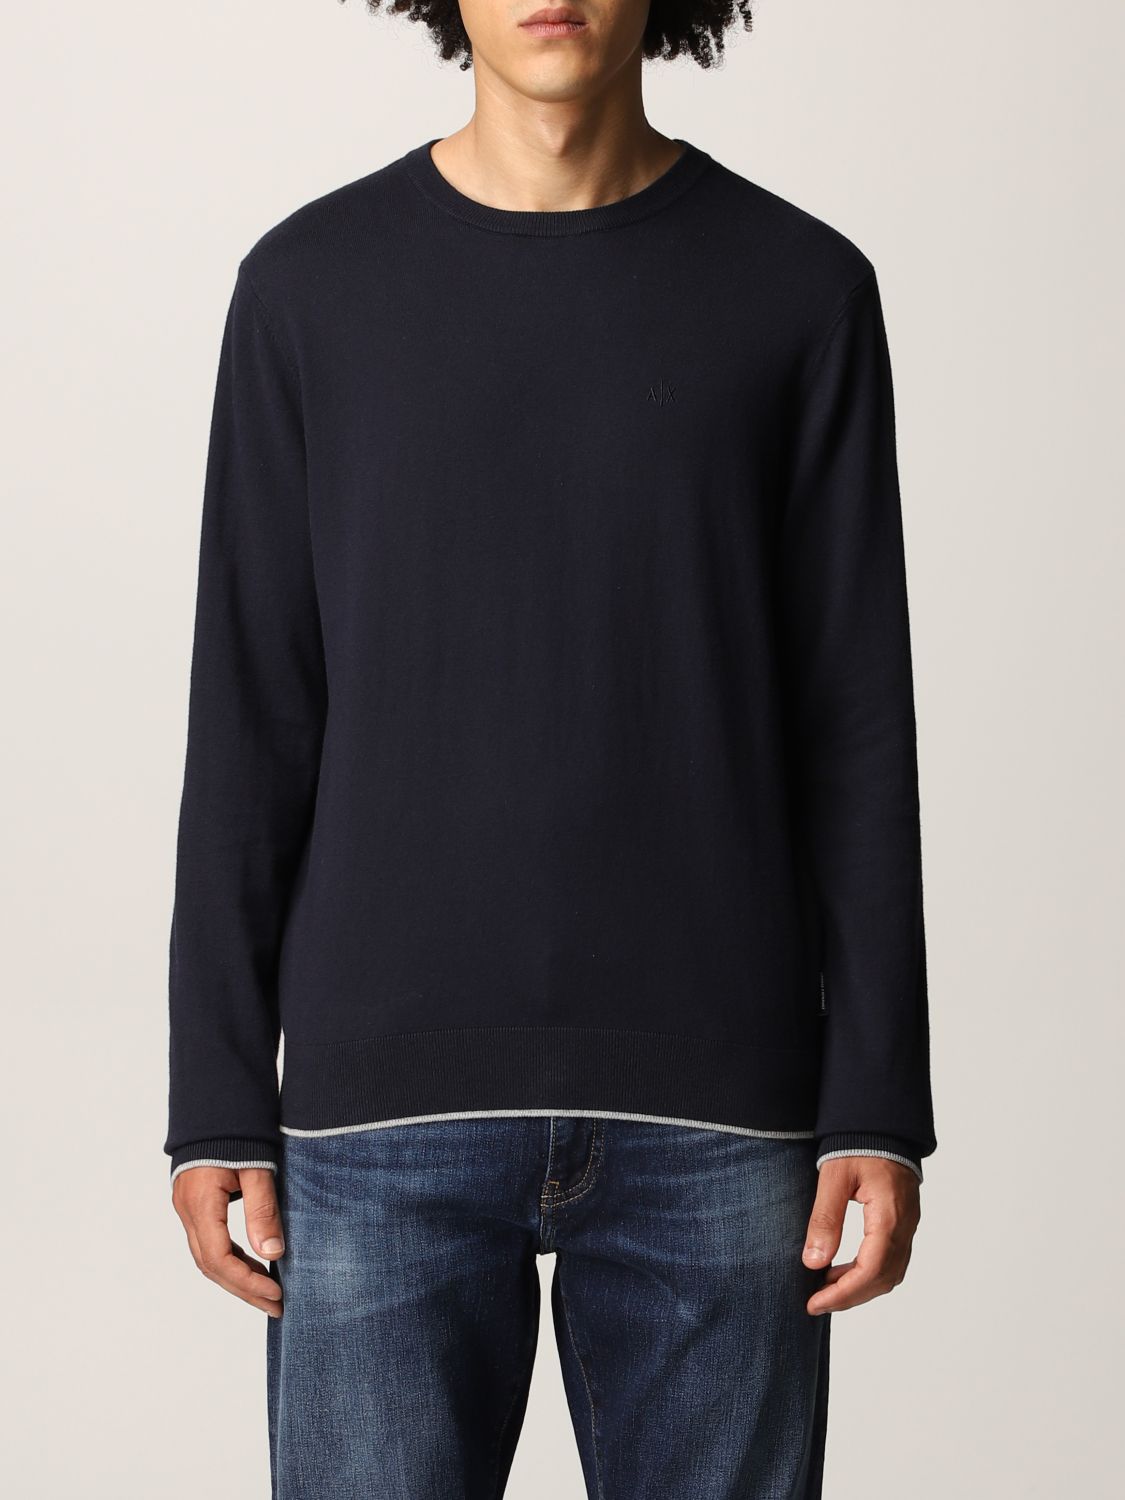 ARMANI EXCHANGE: cotton sweater with embroidered logo - Navy | Armani ...